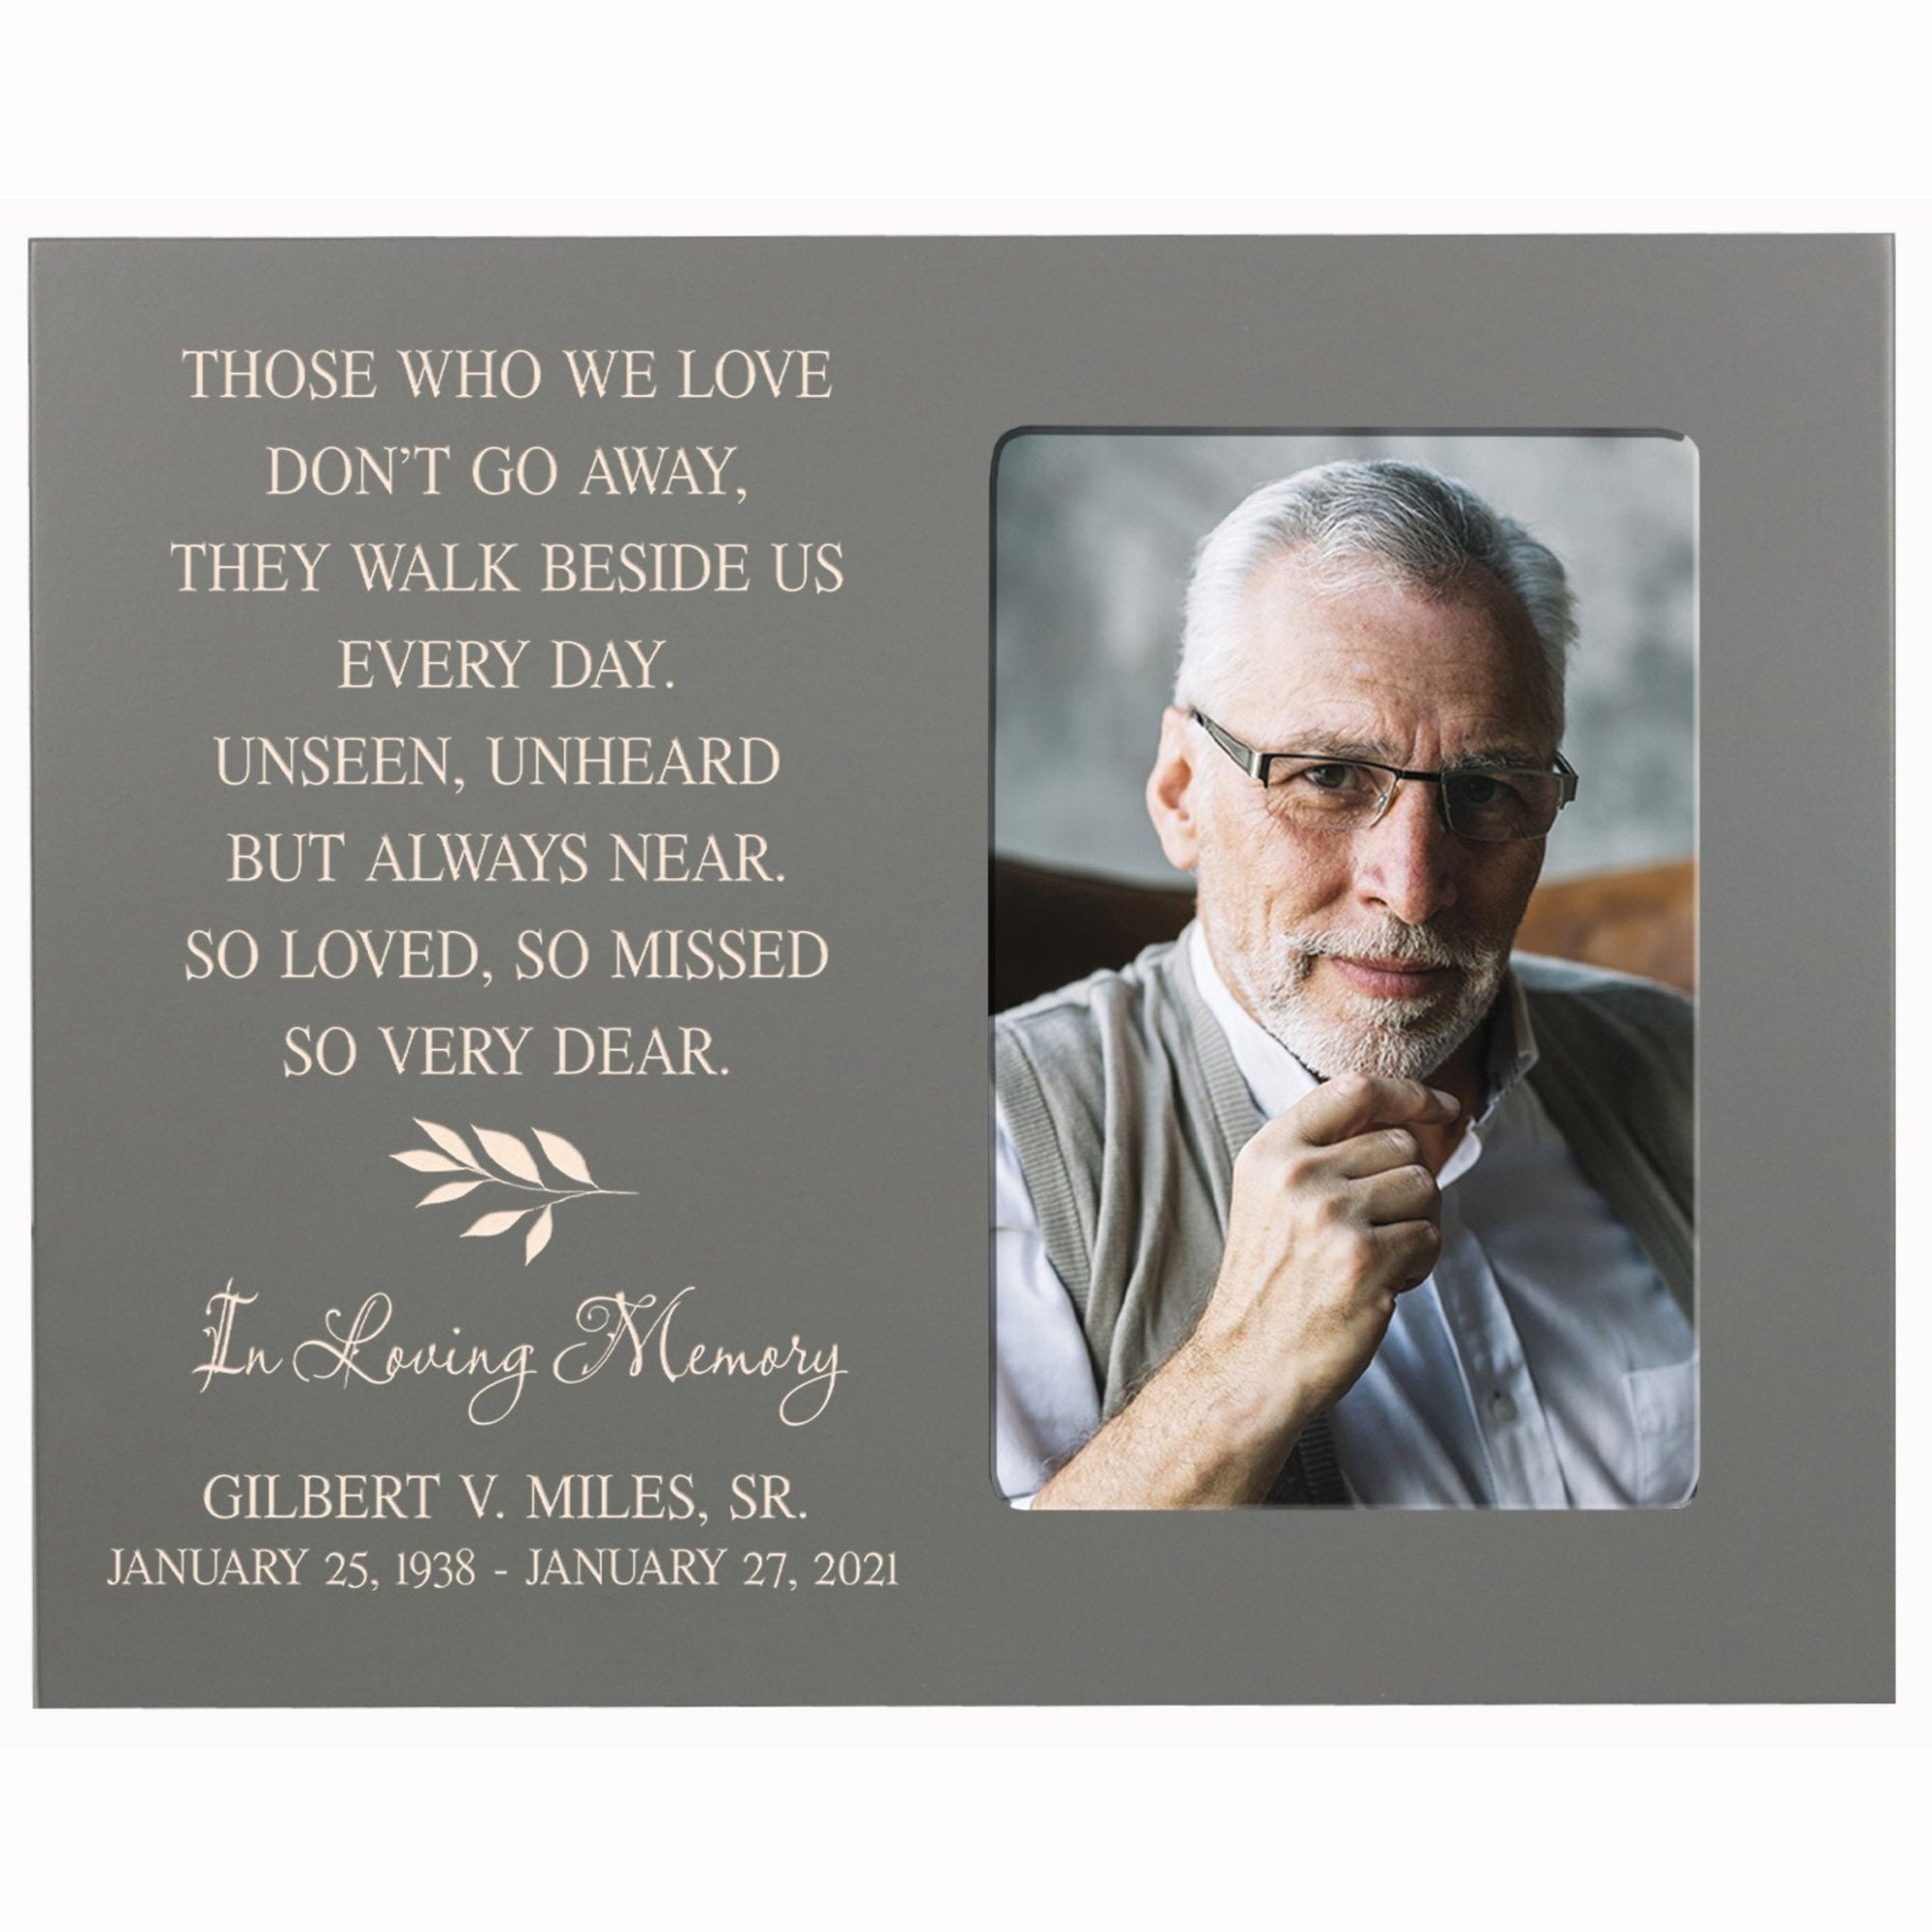 Personalized Horizontal 8x10 Wooden Memorial Picture Frame Holds 4x6 Photo - Those Who We Love - LifeSong Milestones